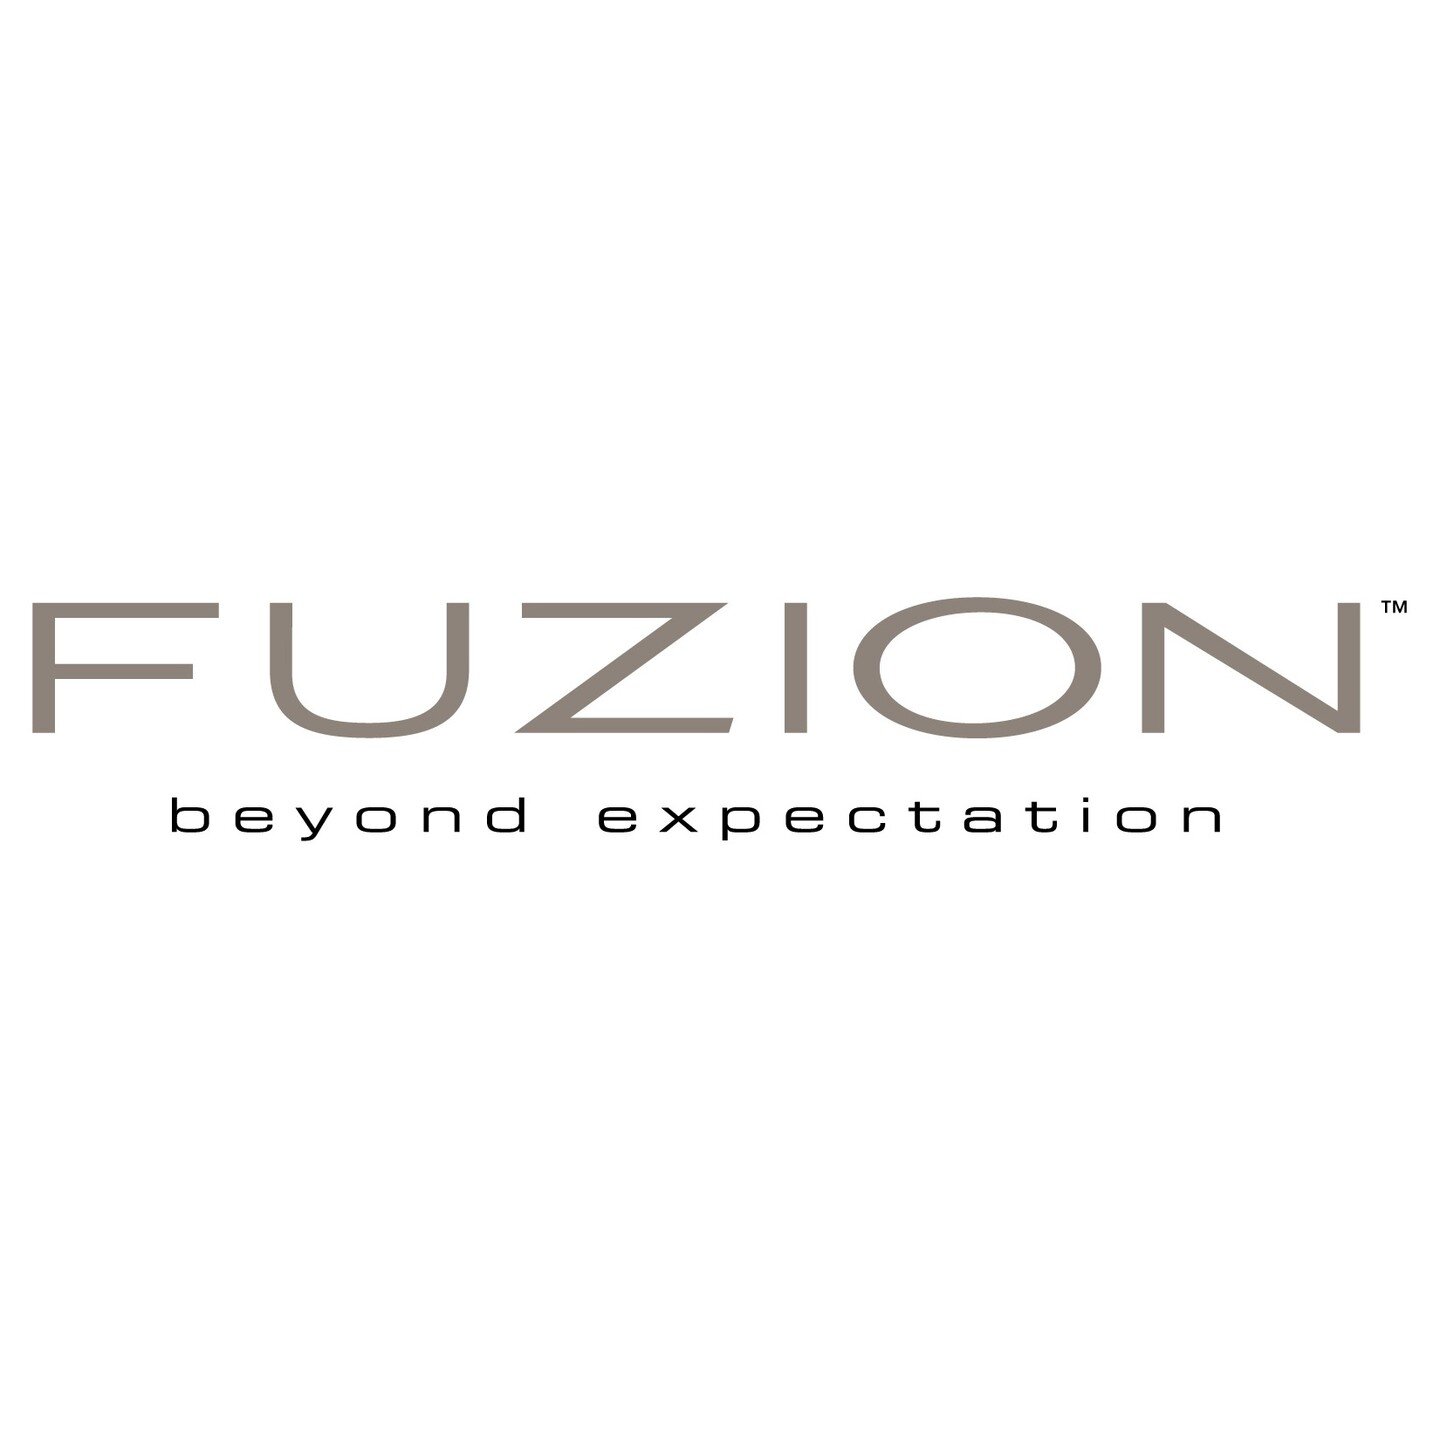 Bronze sponsor!! Thank you @fuzionflooring for supporting us again!